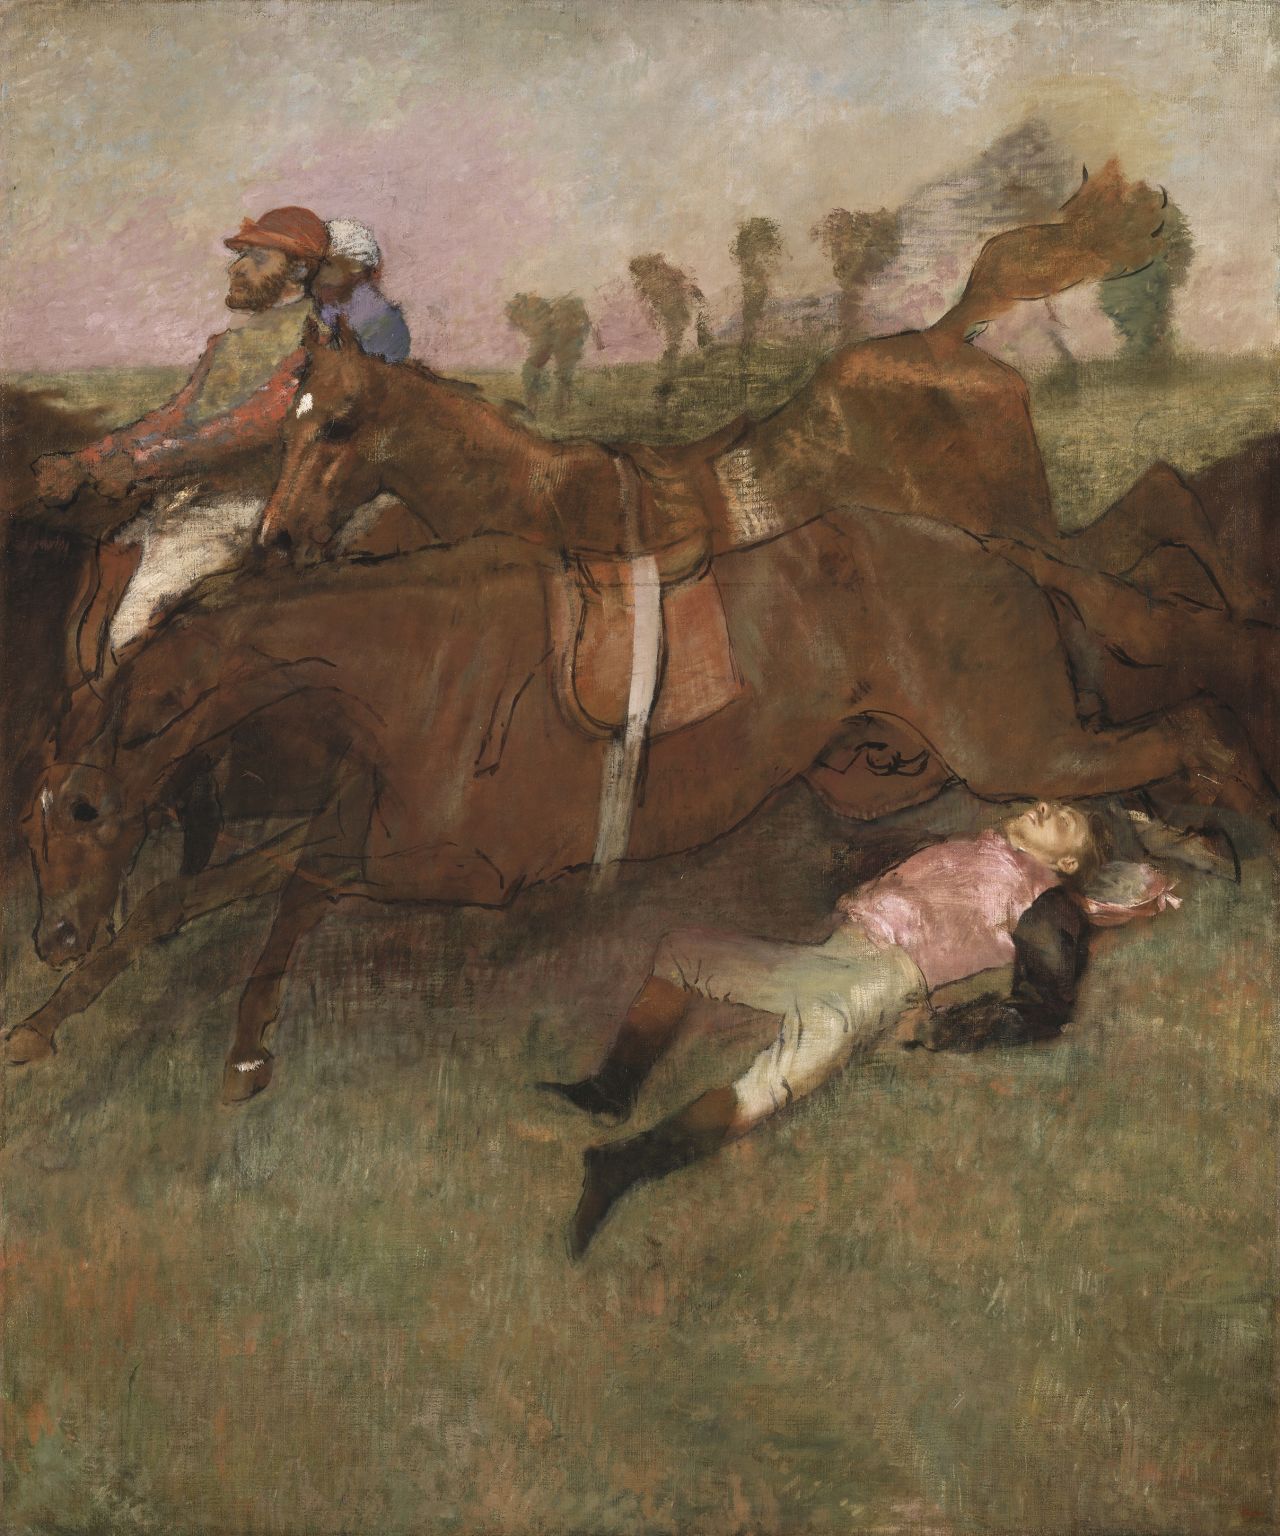 During the 1860s horse racing became a major sporting spectacle in Paris after the Longchamp course was opened in 1857. Horses, jockeys, races and fans were all reflected in Degas' work.